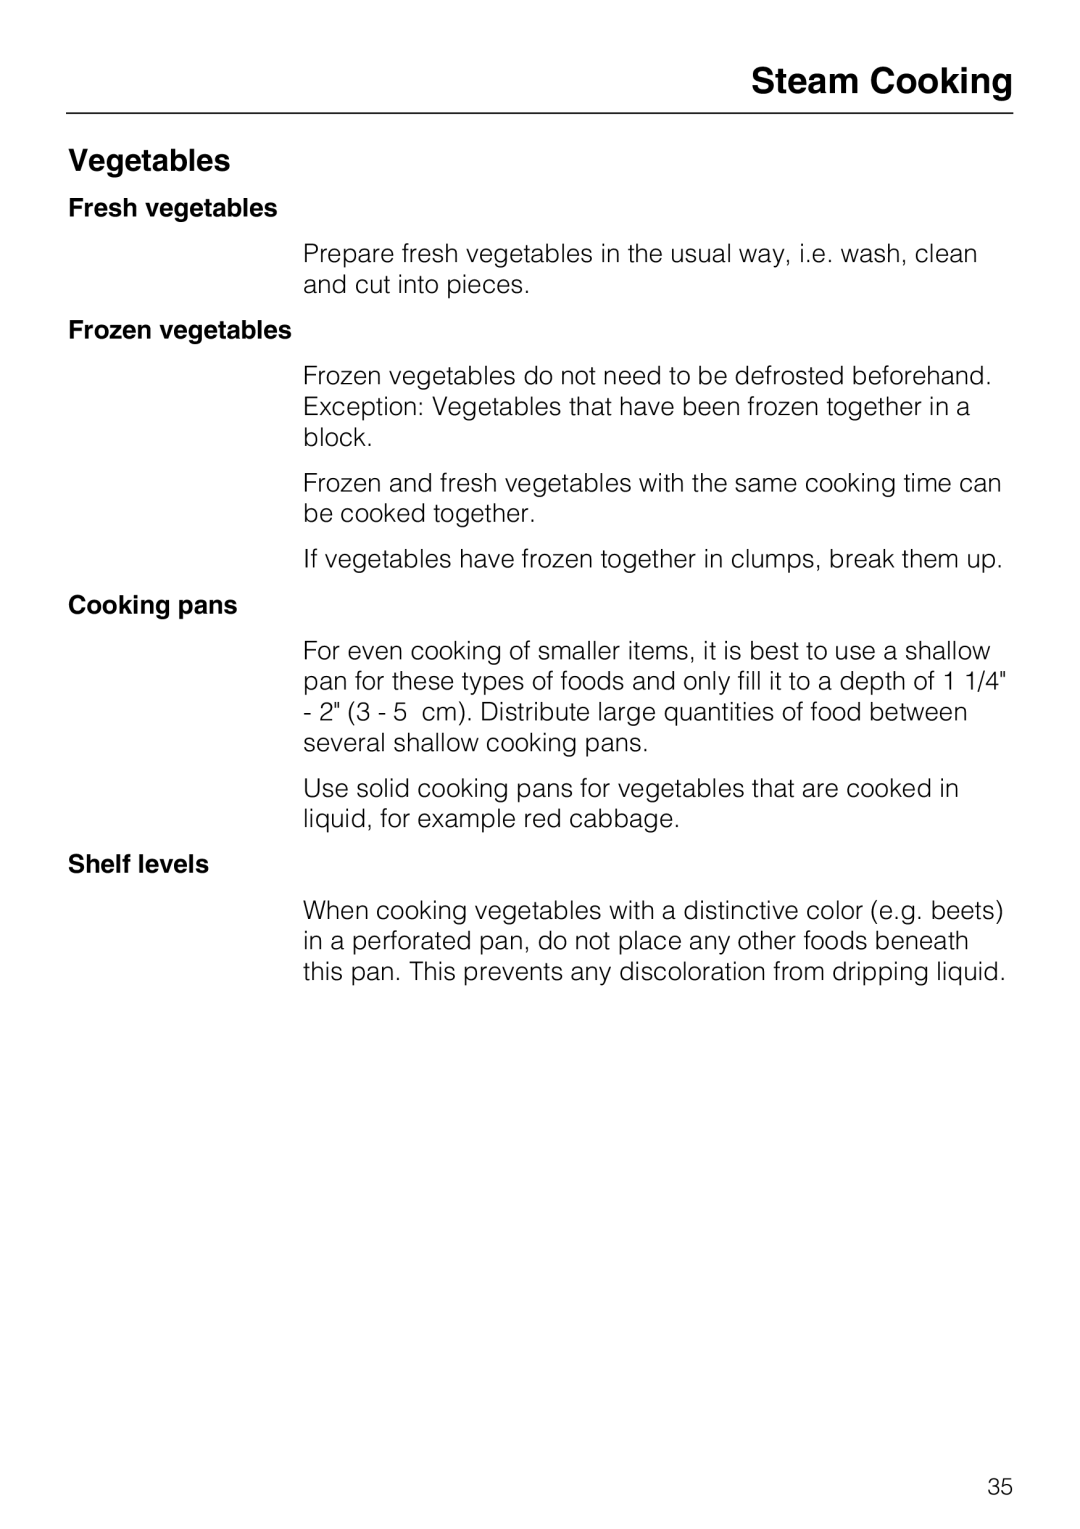 Miele 09 800 830 installation instructions Steam Cooking, Vegetables 